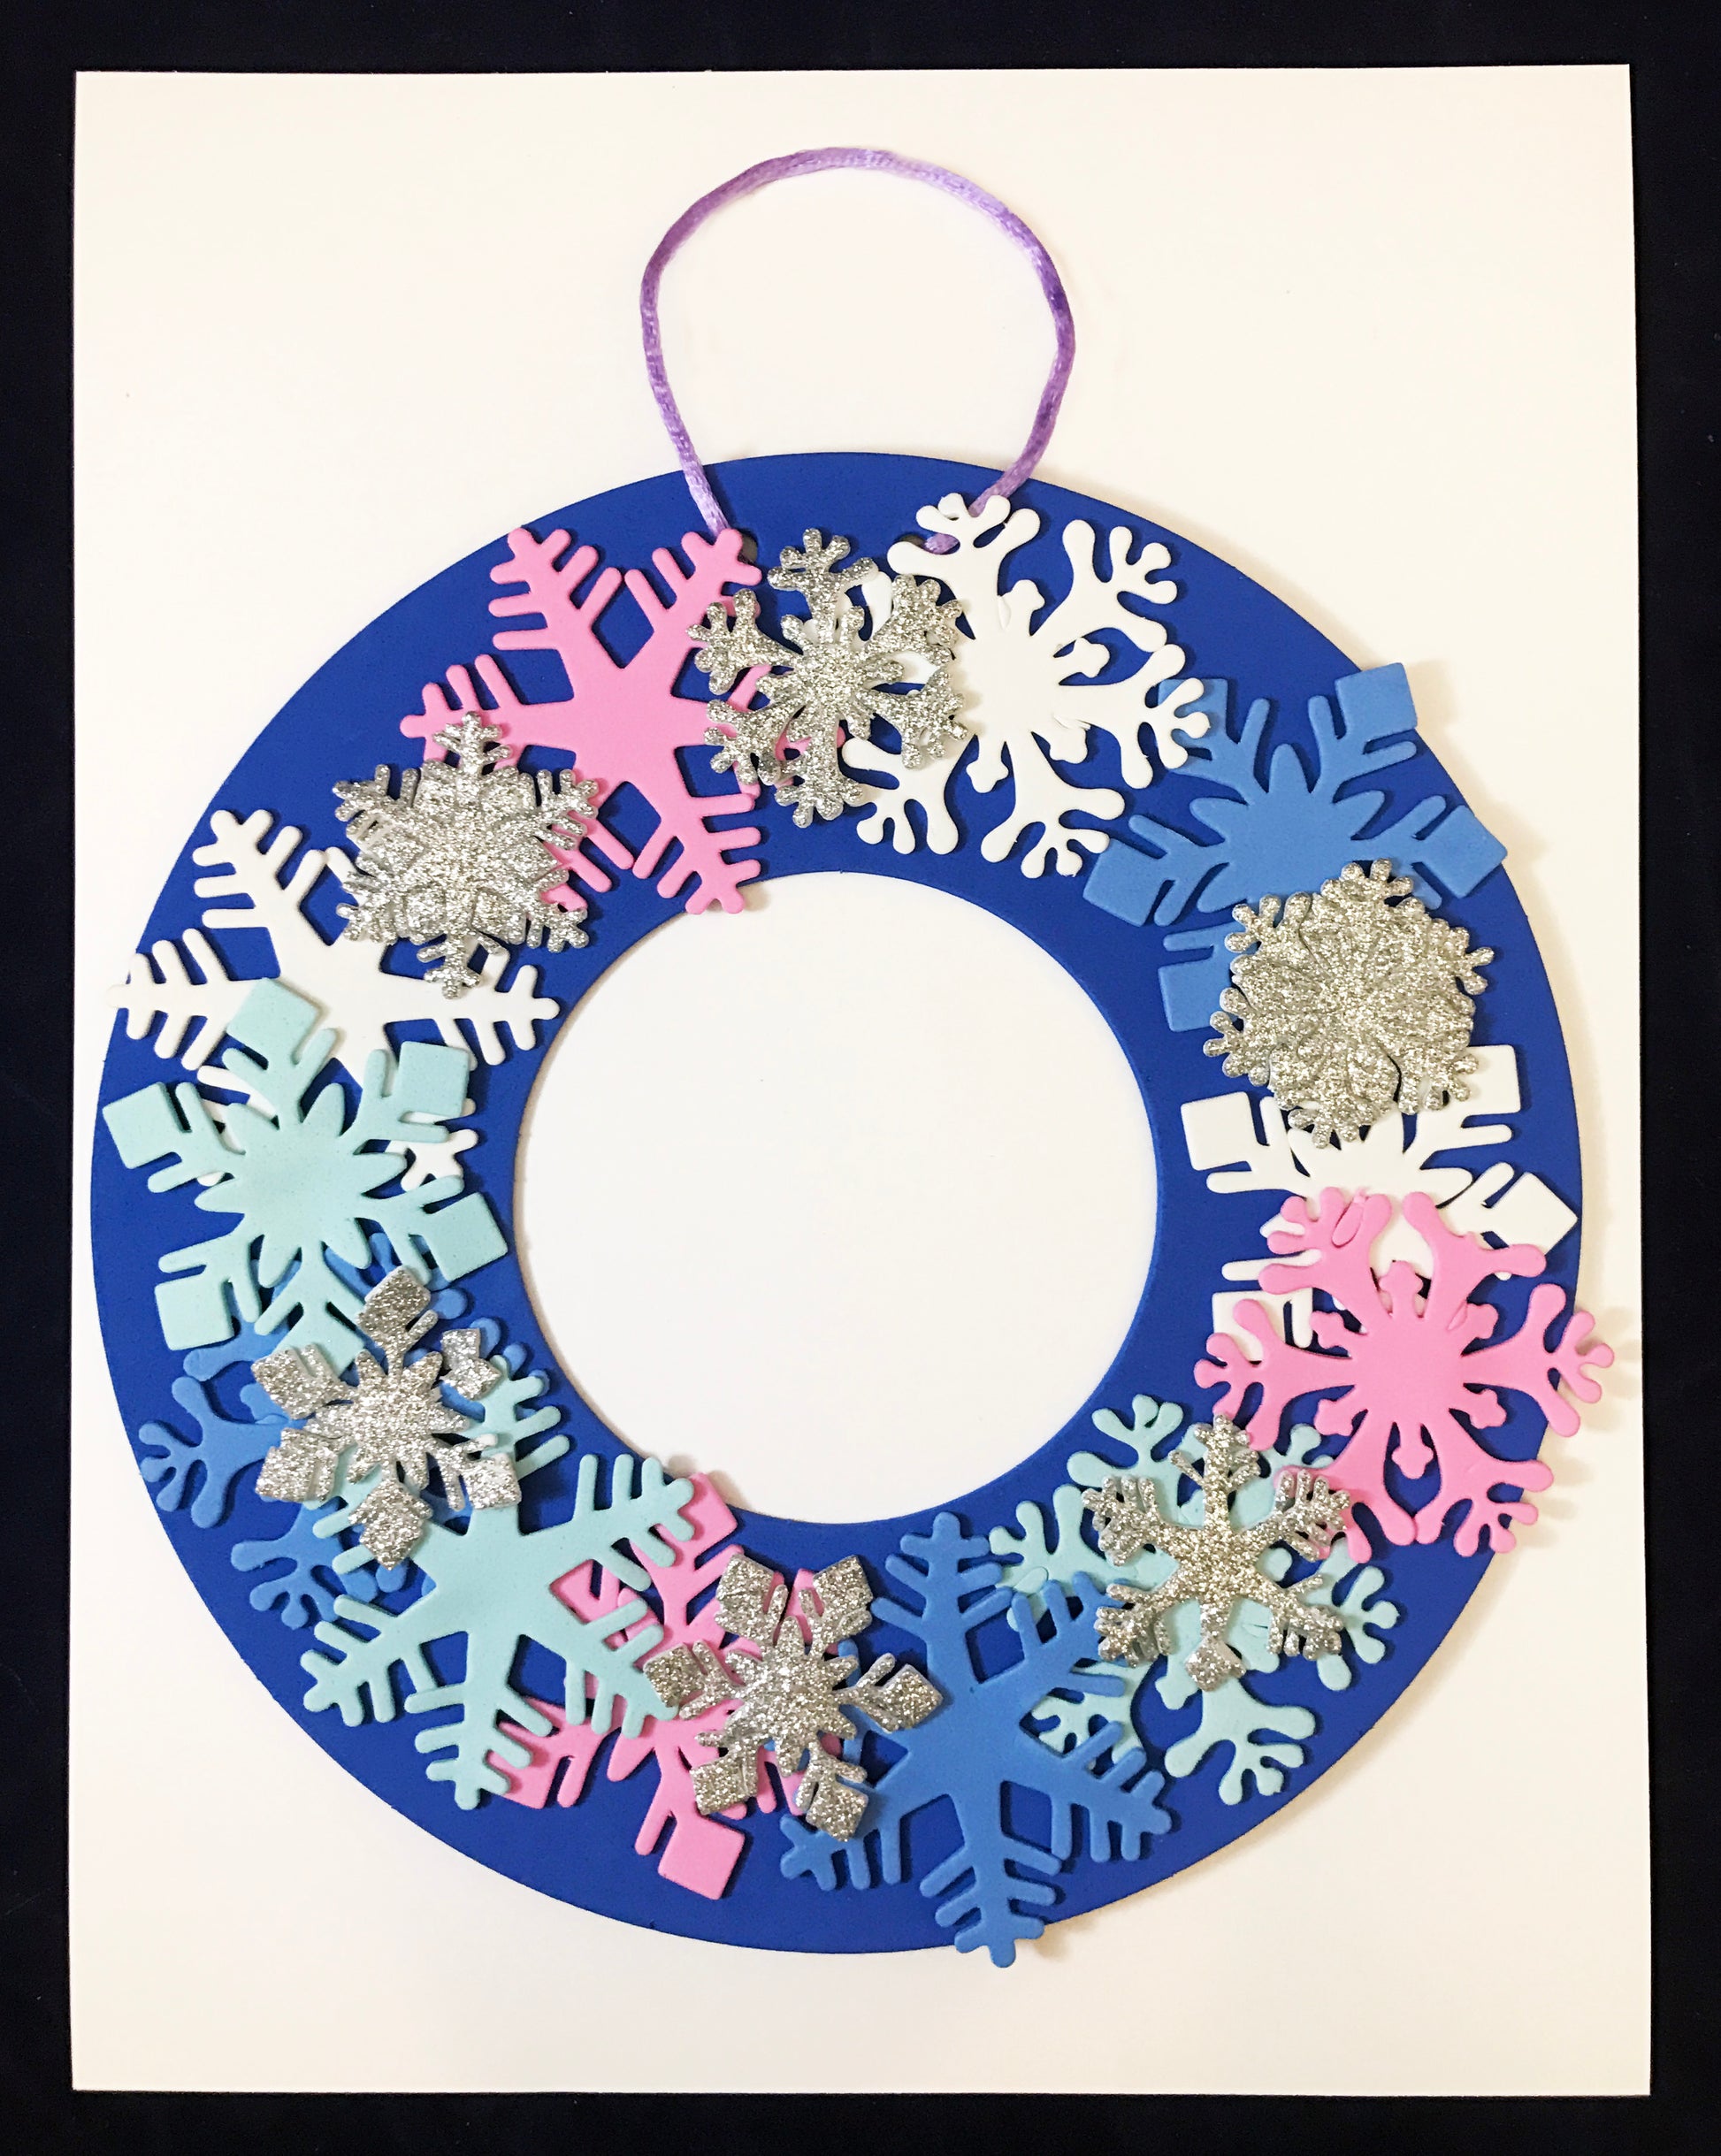 Winter Wreath made of snowflake stickers